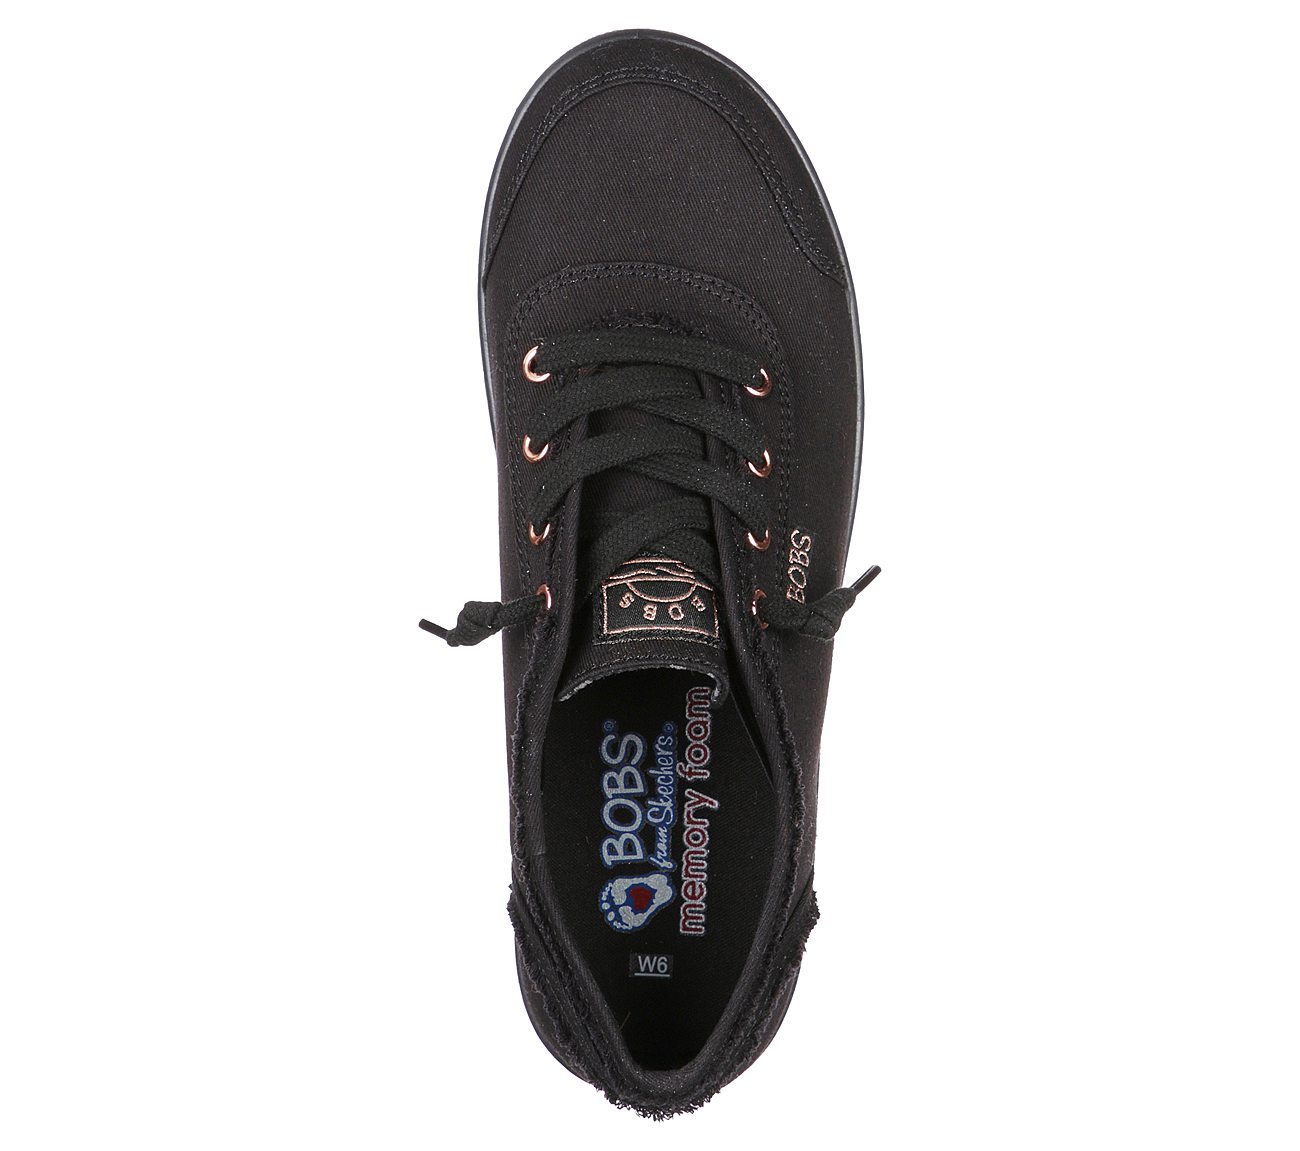 bobs by skechers canvas shoes